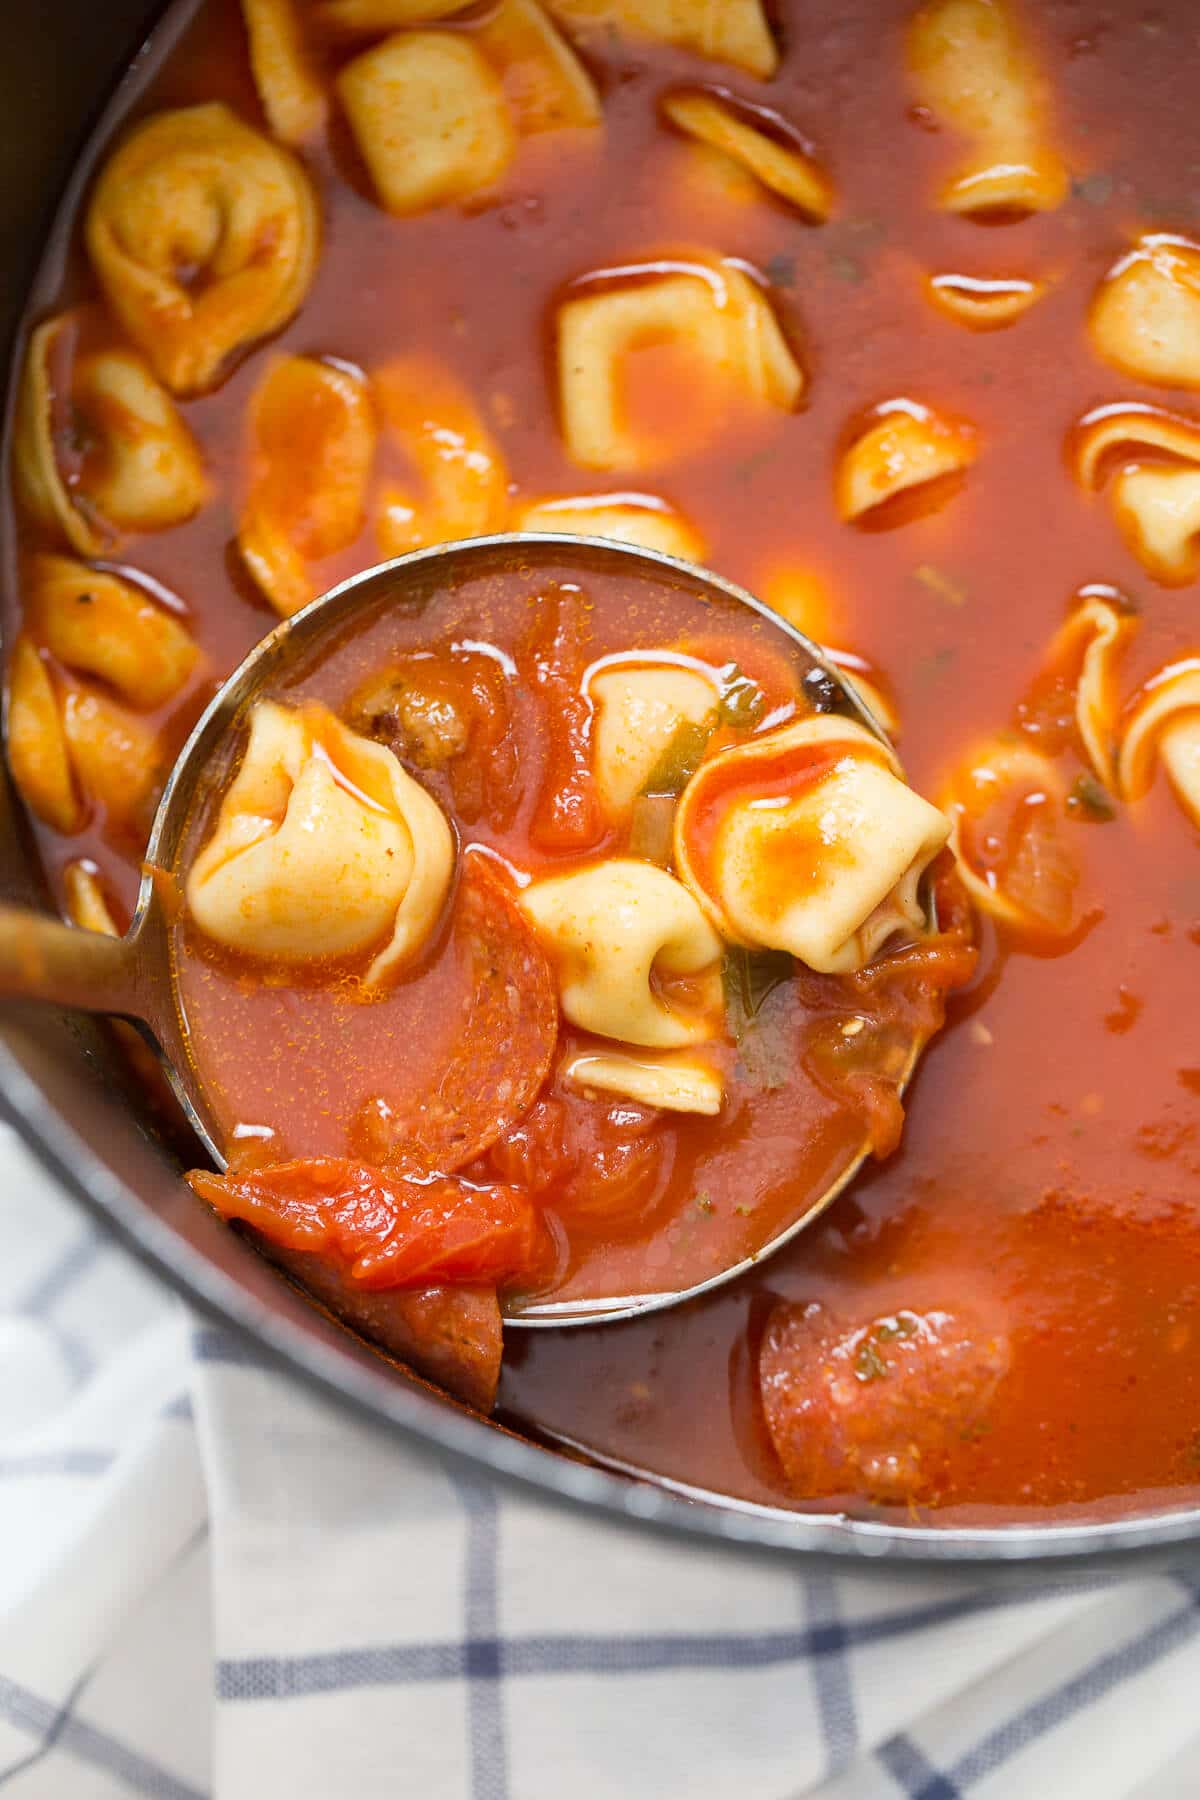 This pizza soup is filled with so much goodness and topped with a fun puff pastry "crust"!